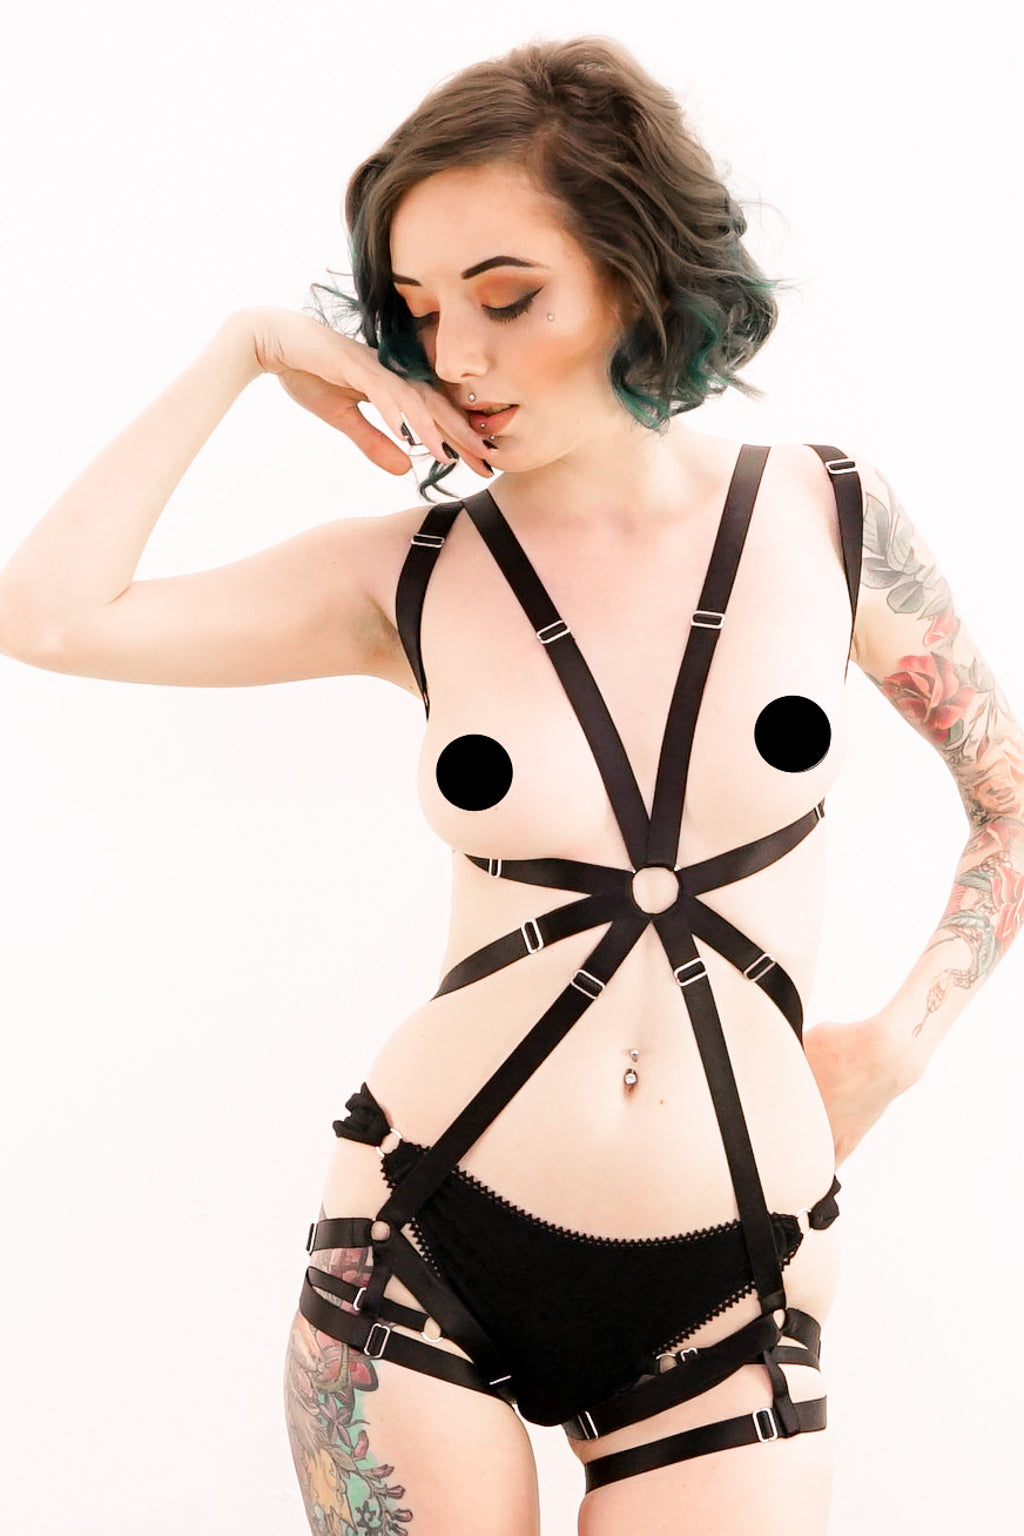 A woman wearing a black one piece harness.